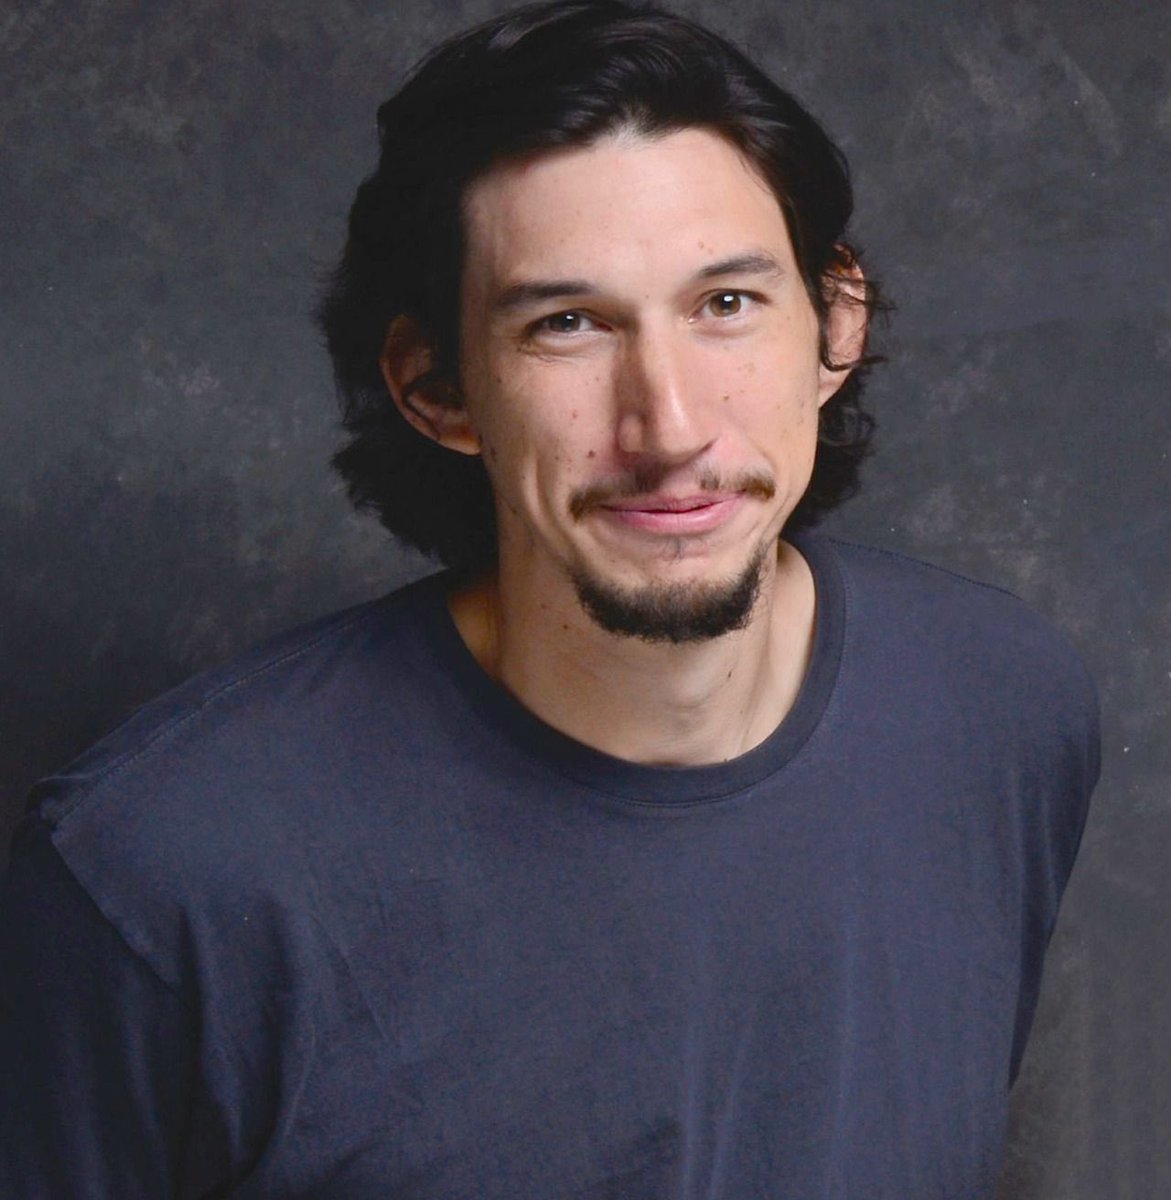 smiley Adam Driver and his ears.